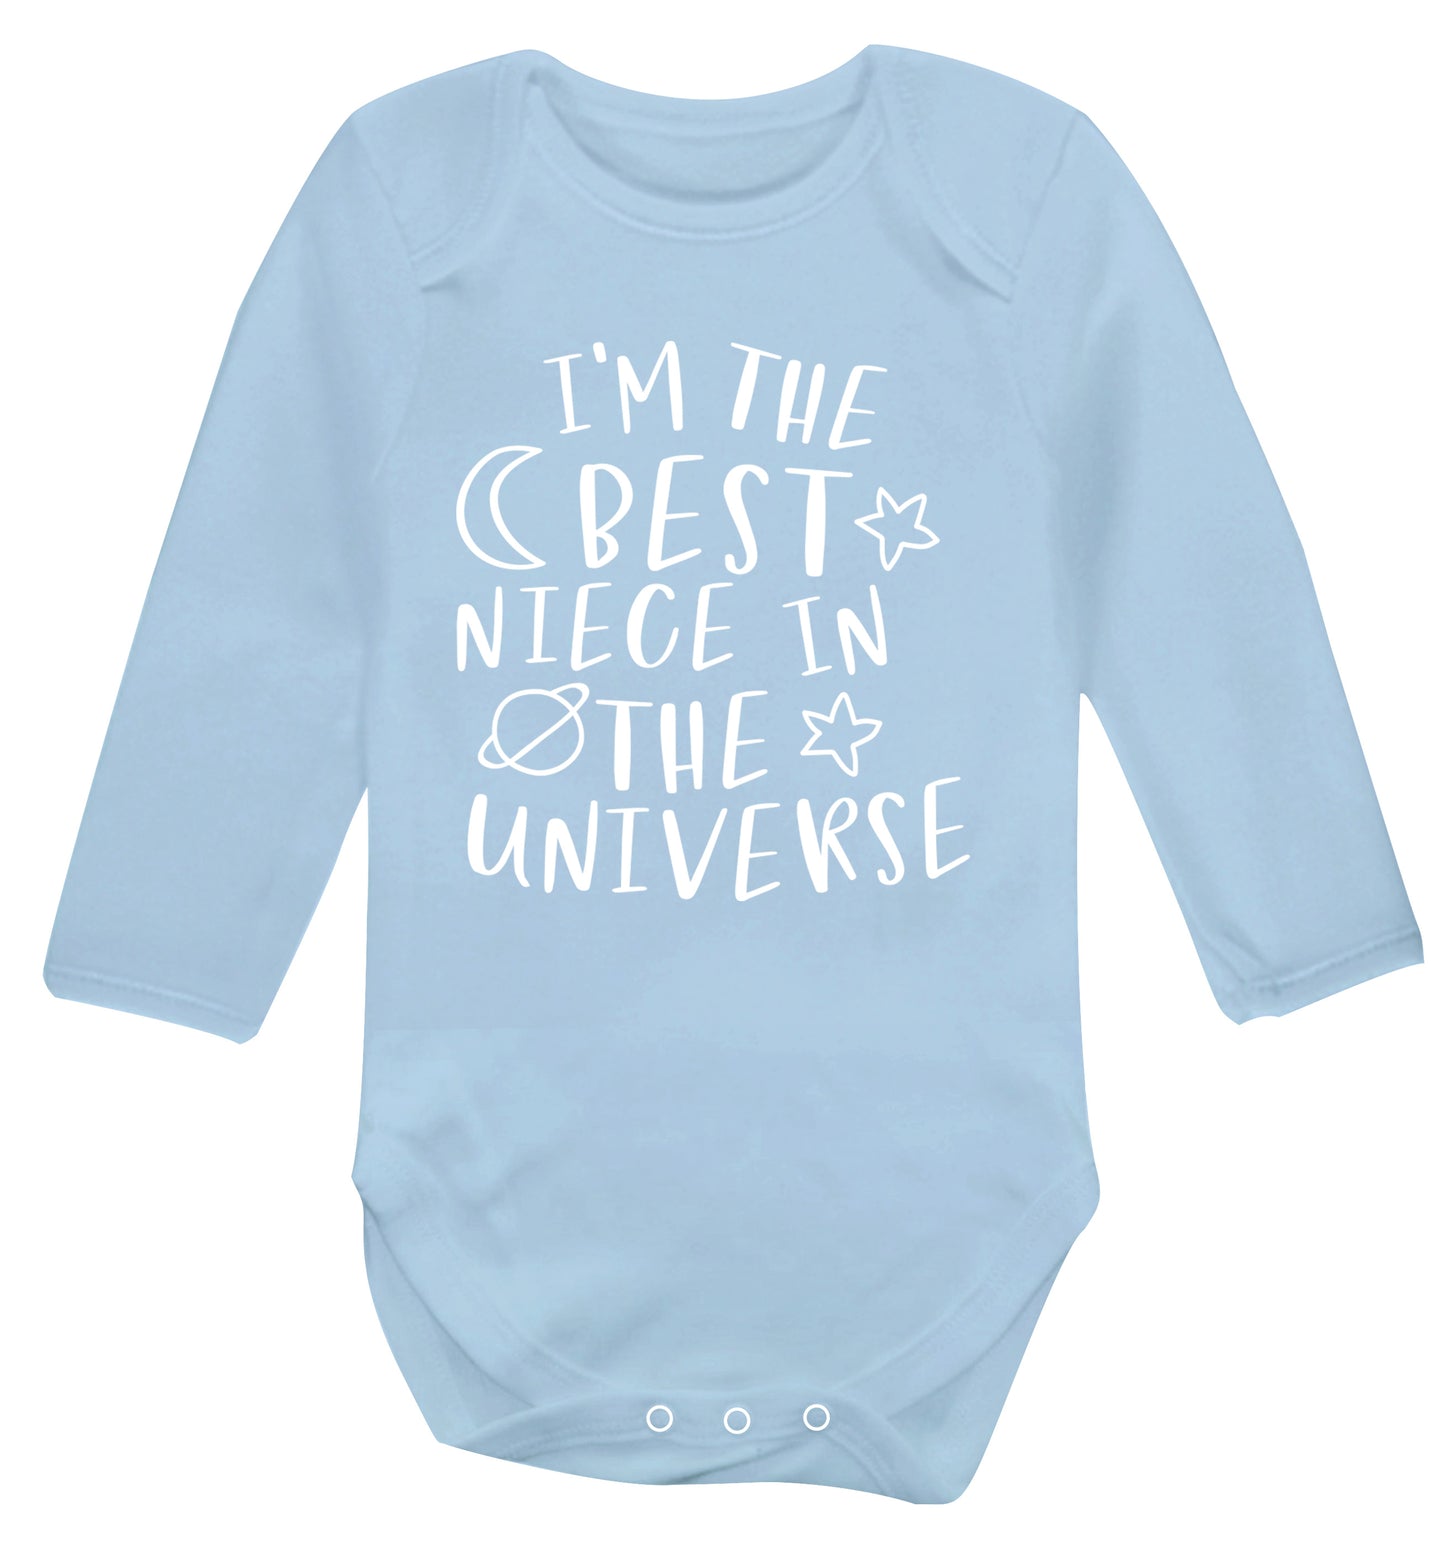 I'm the best niece in the universe Baby Vest long sleeved pale blue 6-12 months